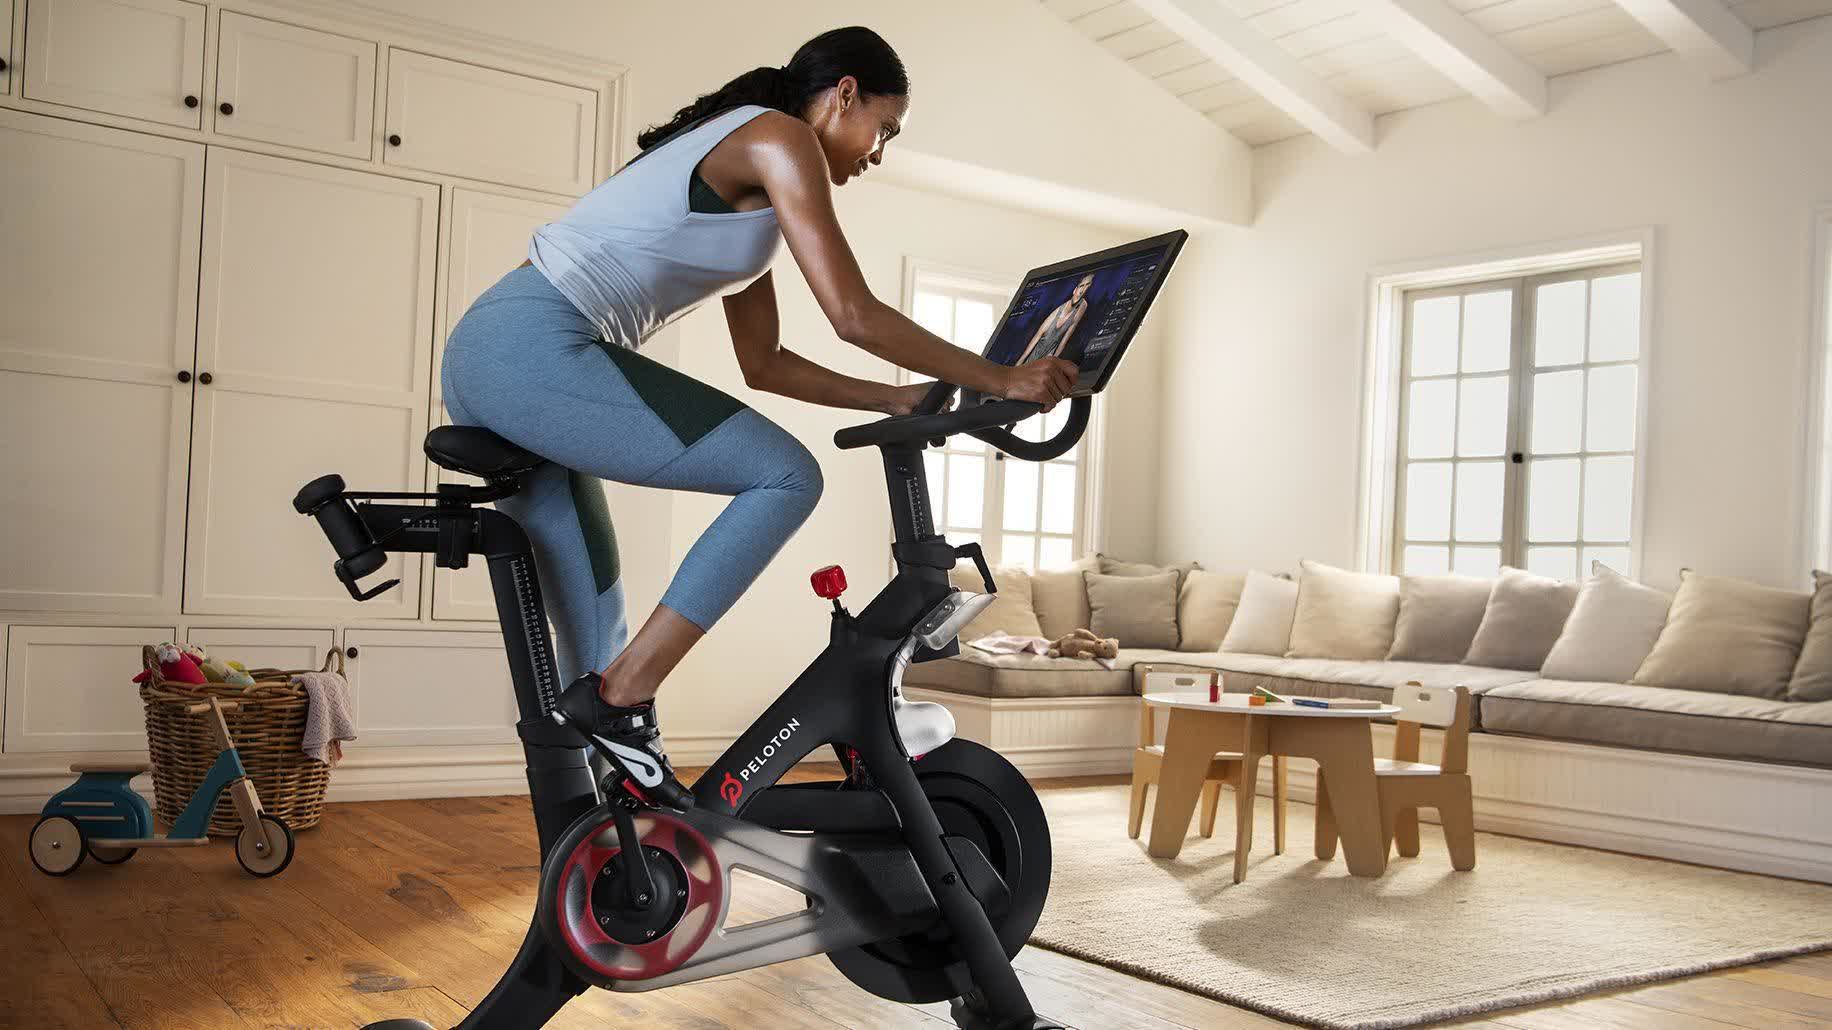 Peloton is trying to get the spinning trademark canceled